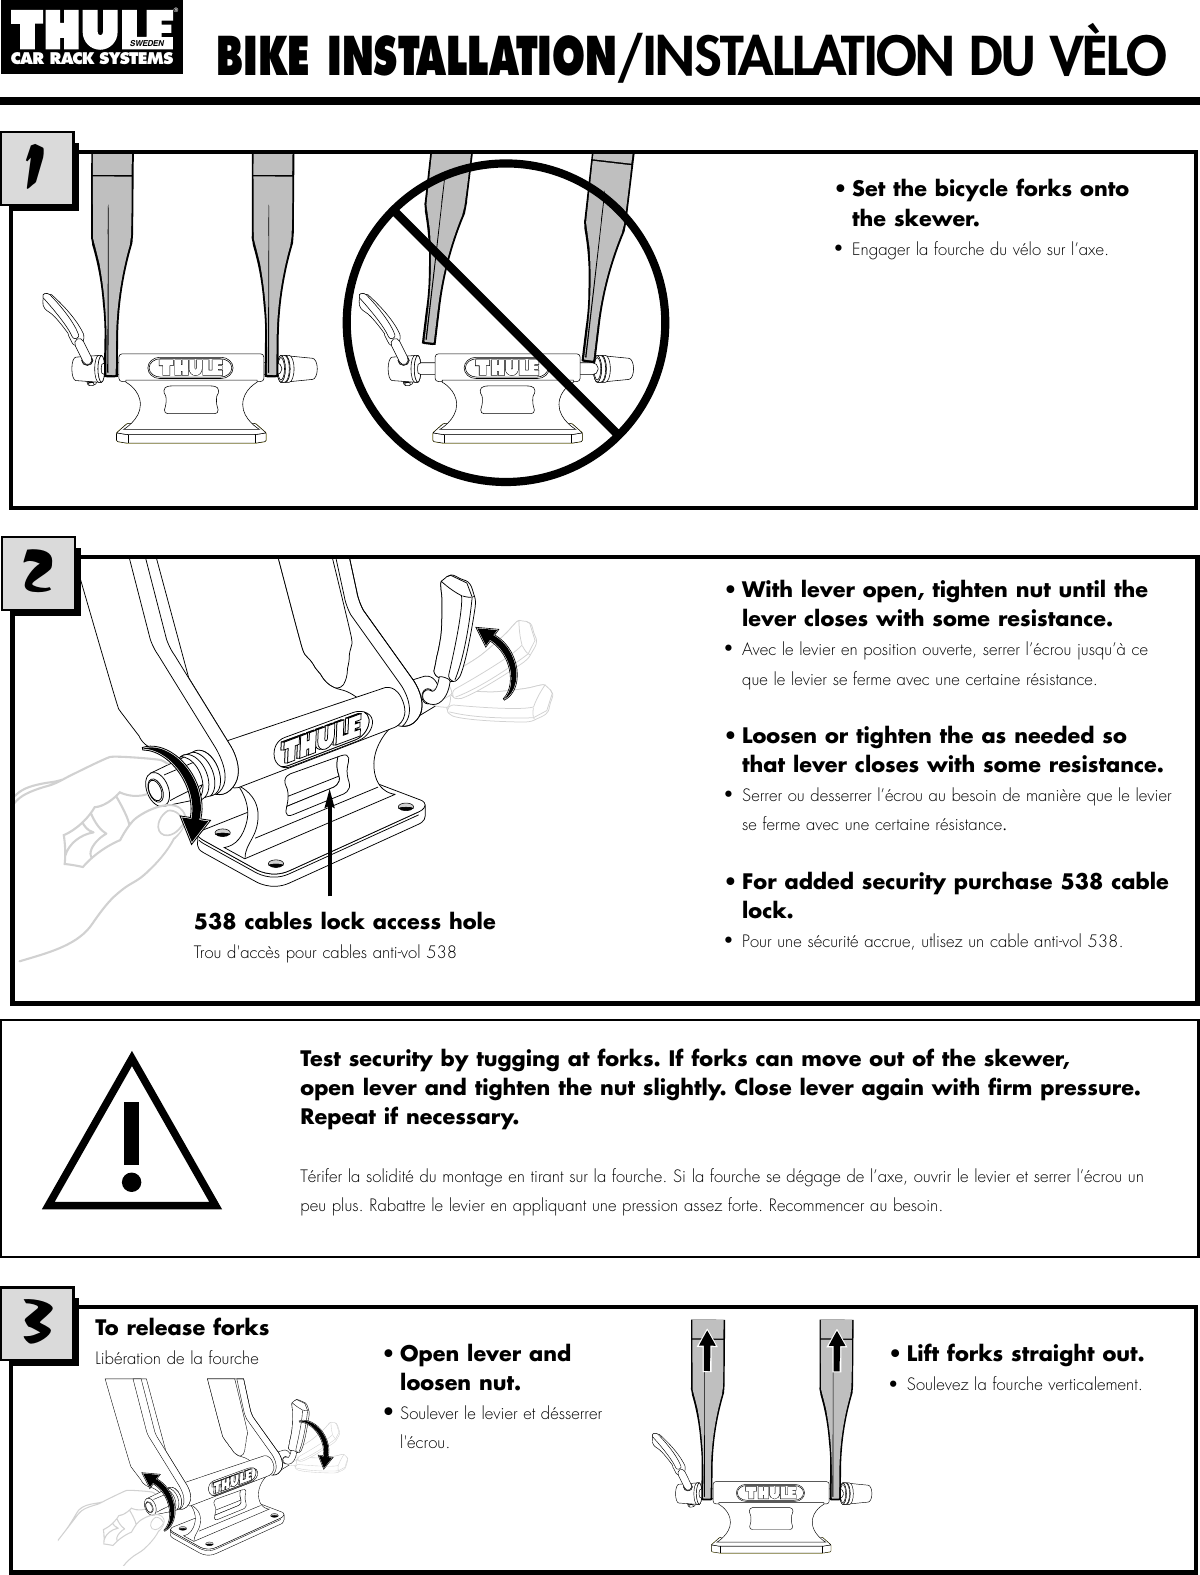 Page 6 of 7 - Thule Thule-Bed-Rider-822-91822-Users-Manual- 501-5326-02#822/91822 Bed Rider  Thule-bed-rider-822-91822-users-manual